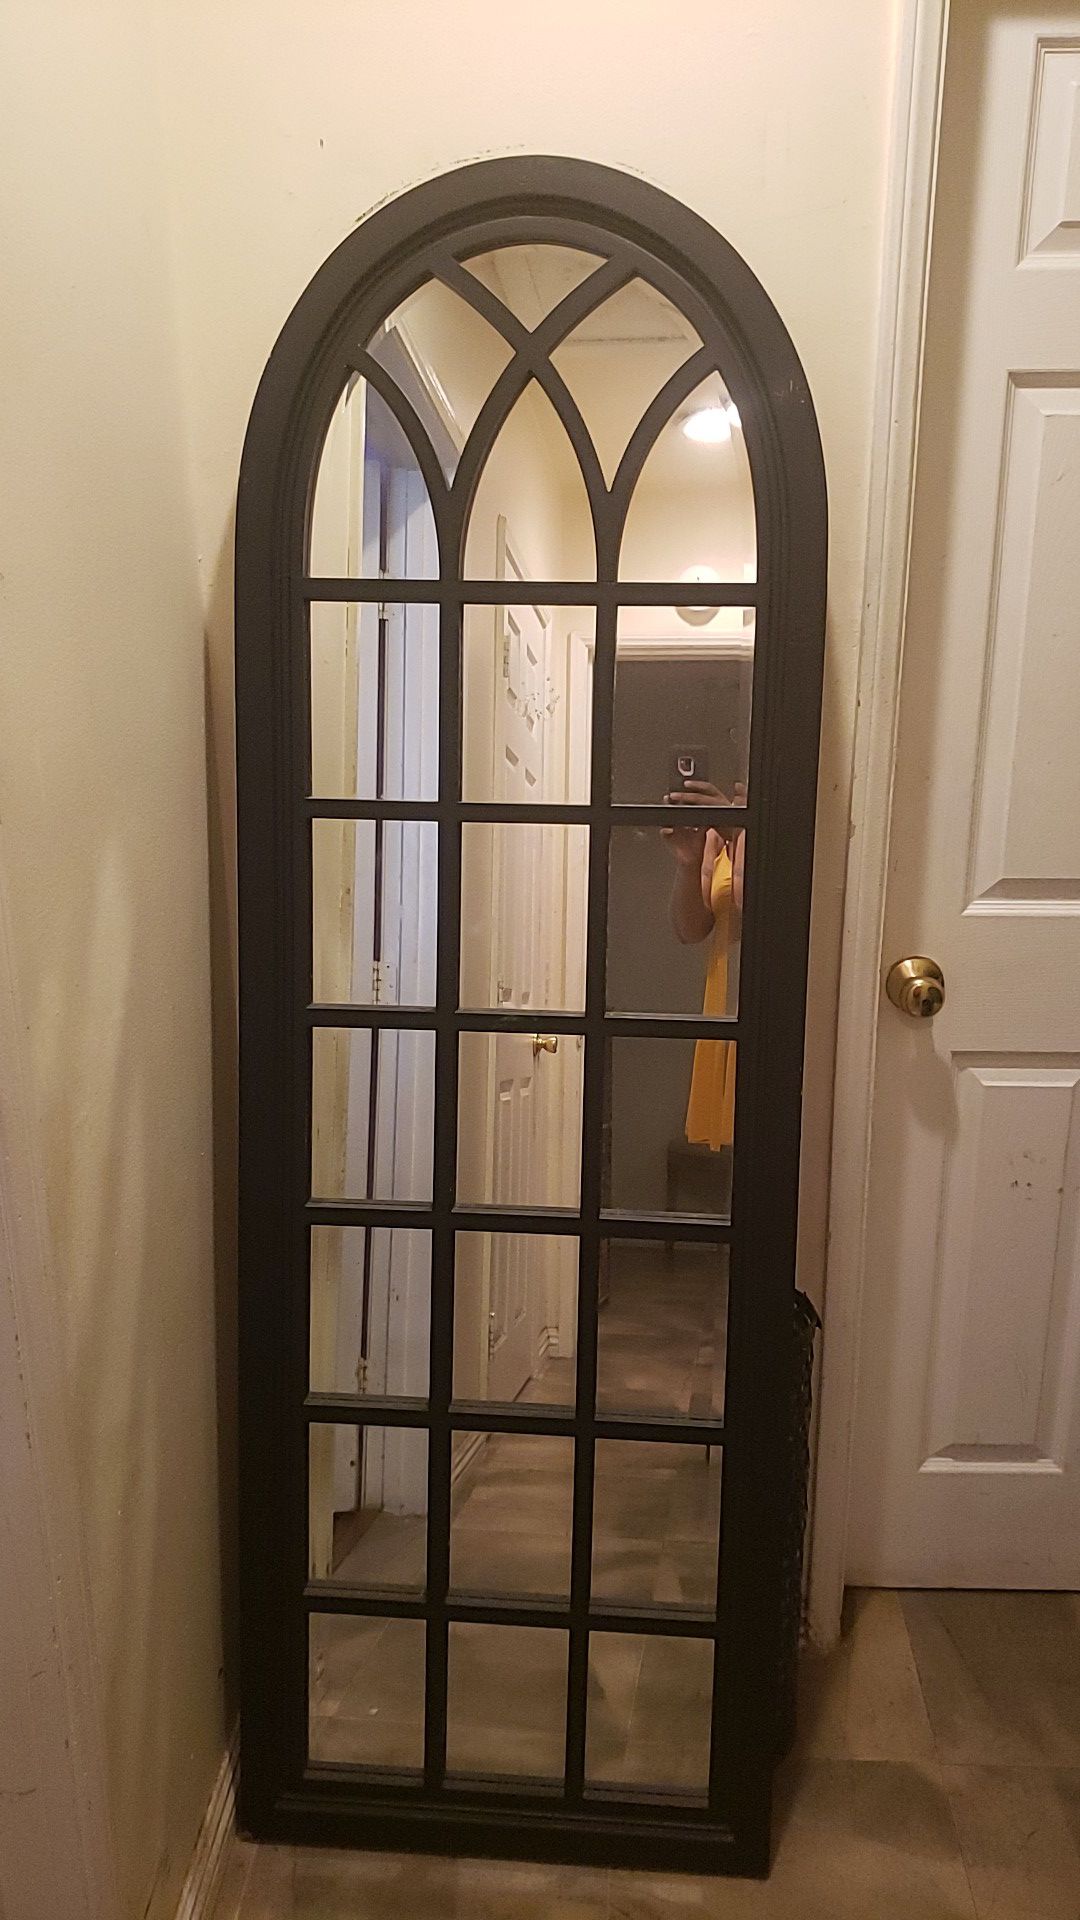 ARCHWAY MIRROR! 4FT. 11 INCHES BY 24 INCHES